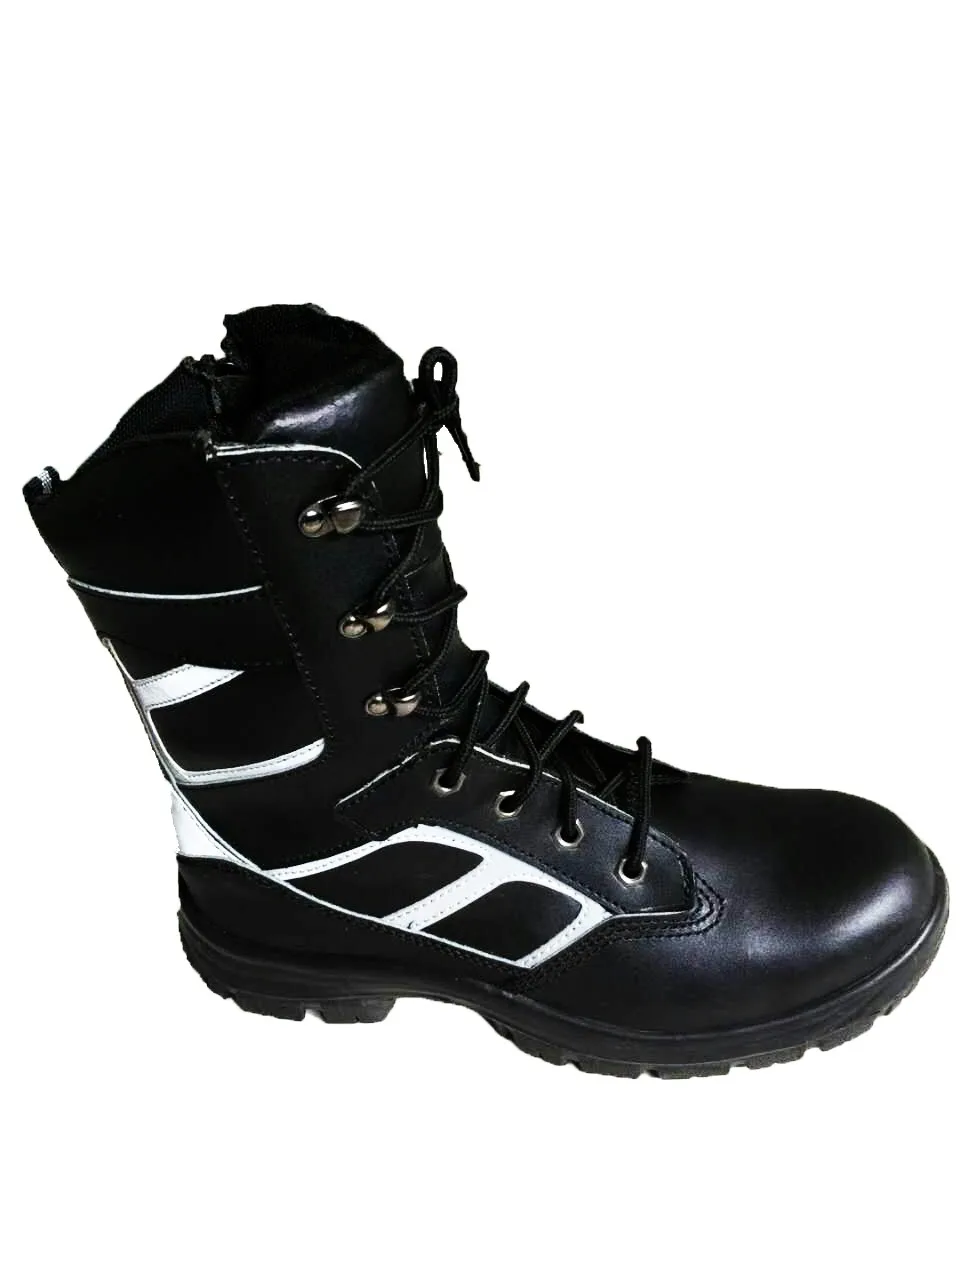 Firefighter Boots With Laces And Zipper 